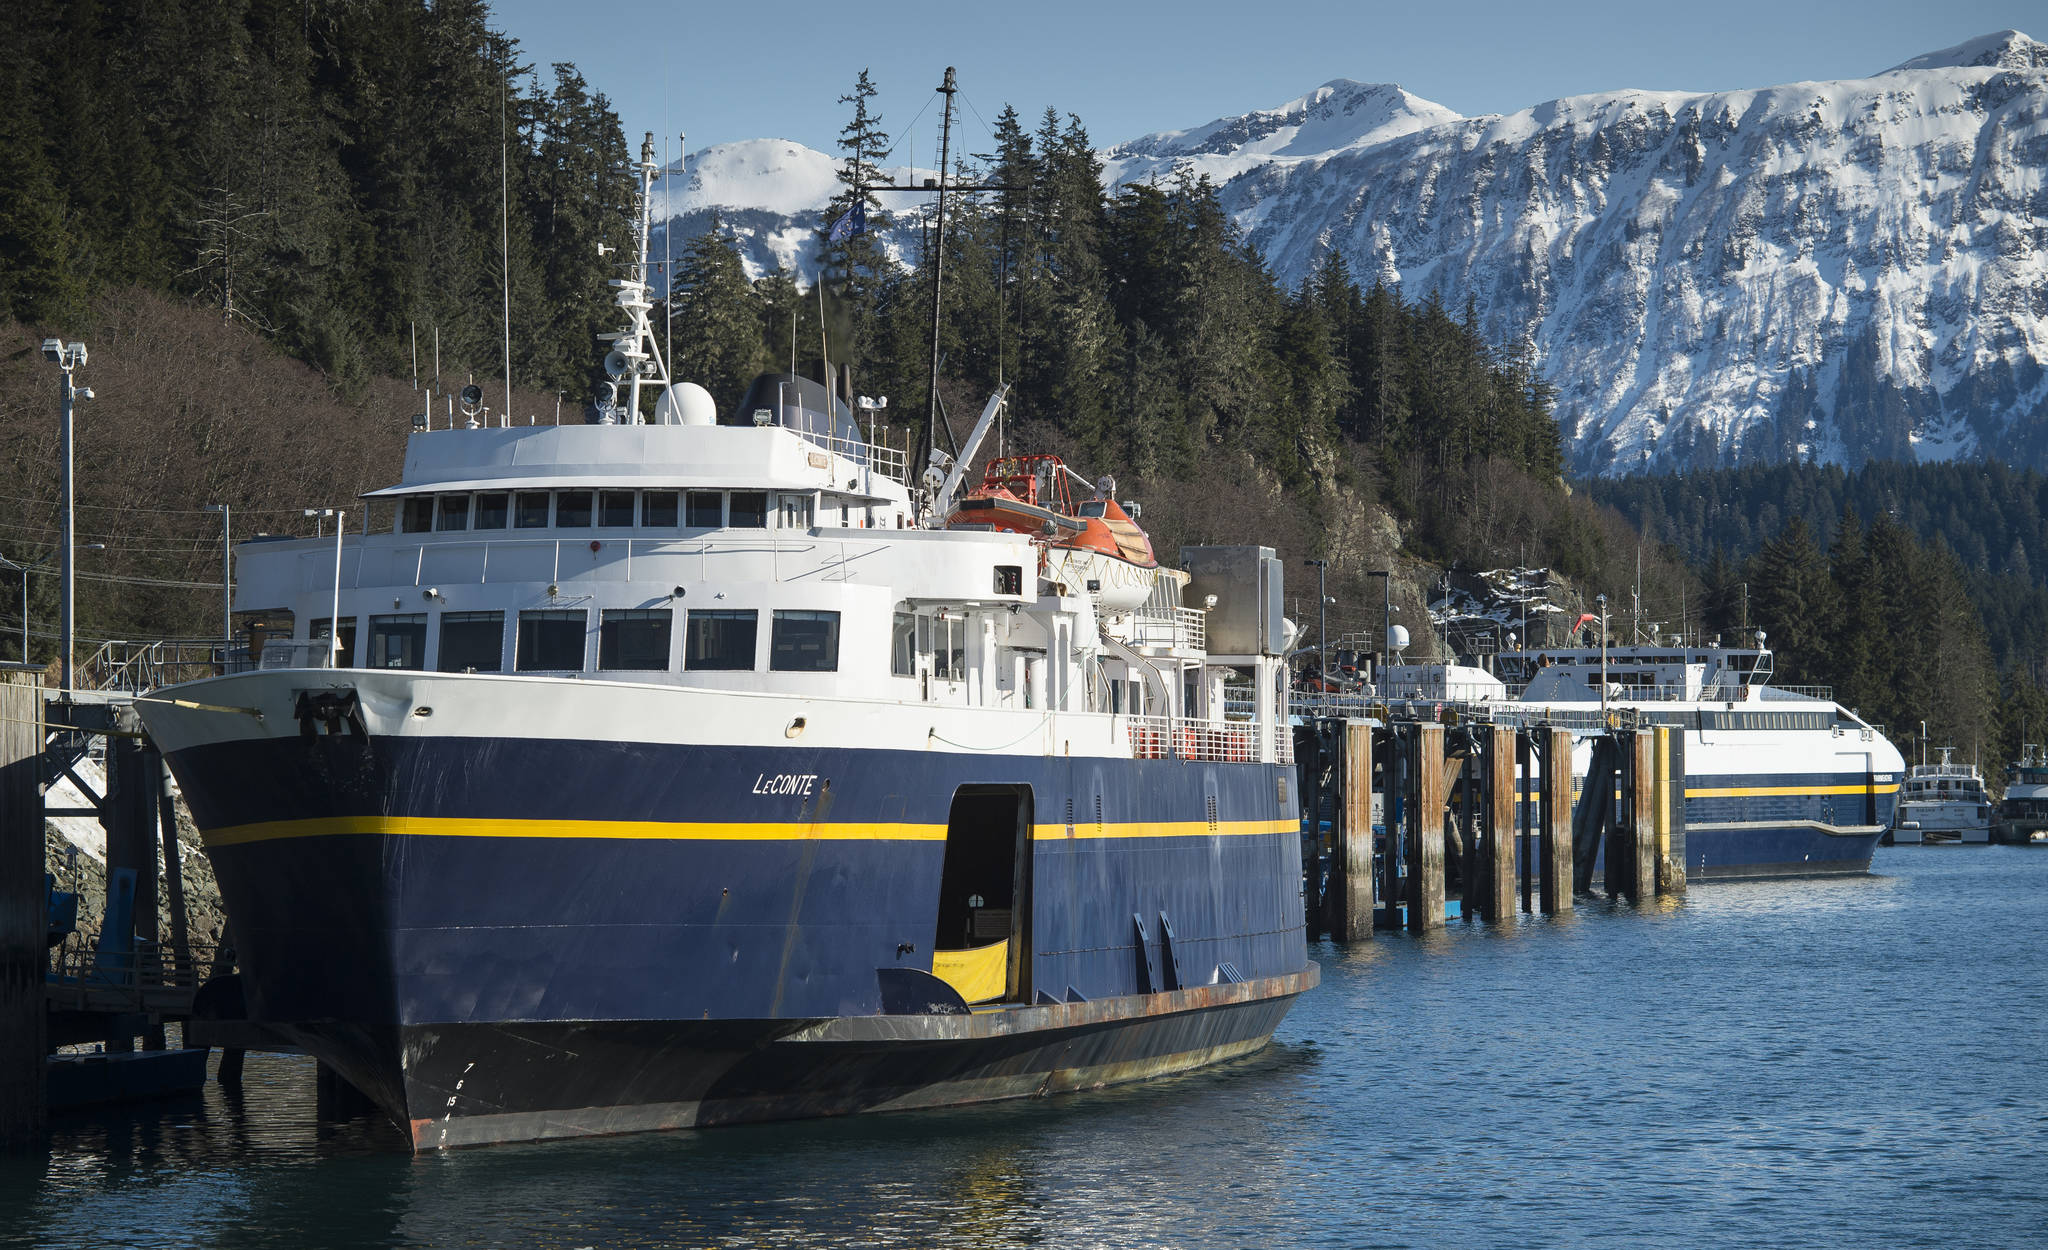 Opinion: Why Alaska-class ferries were the right decision